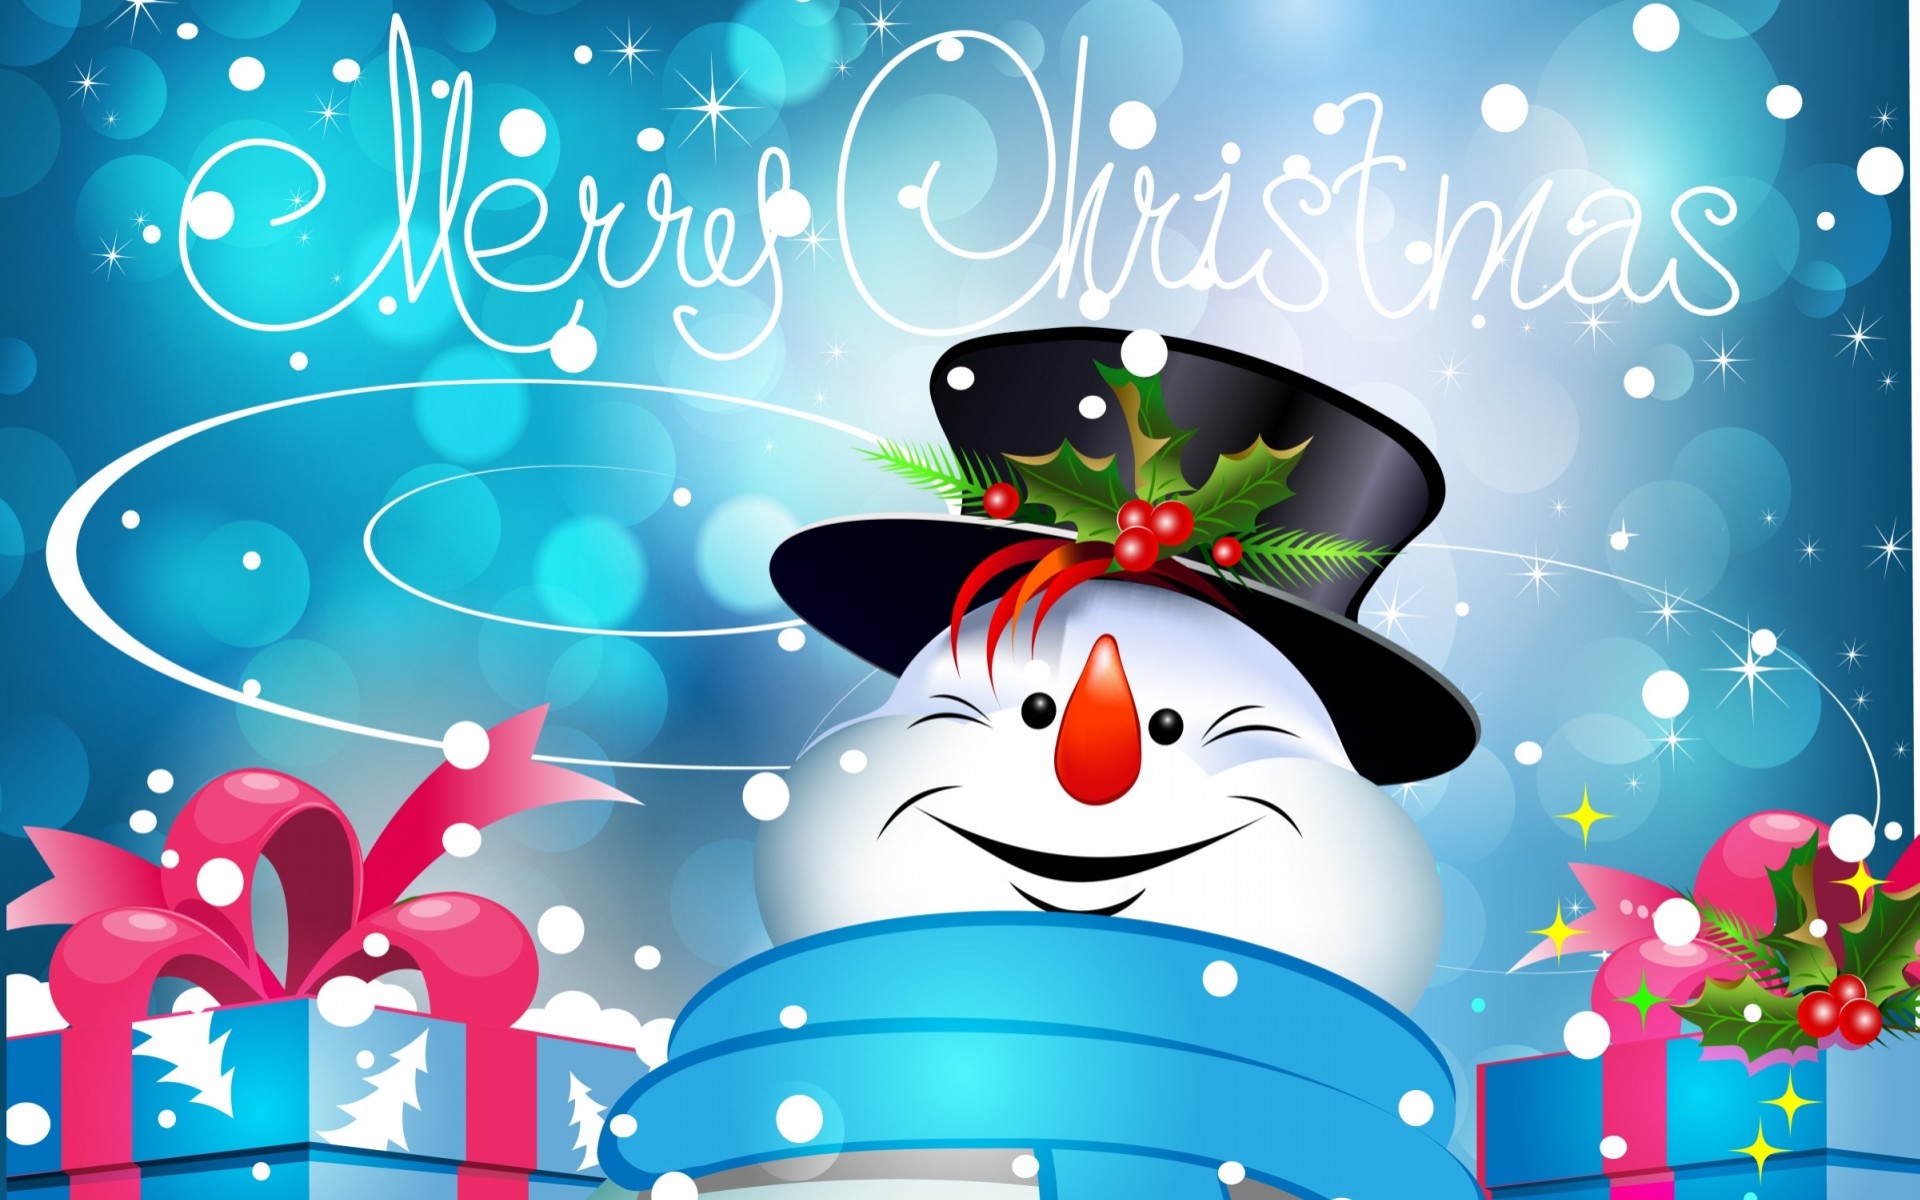 Animated Christmas Wallpapers for Desktop (56+ images)